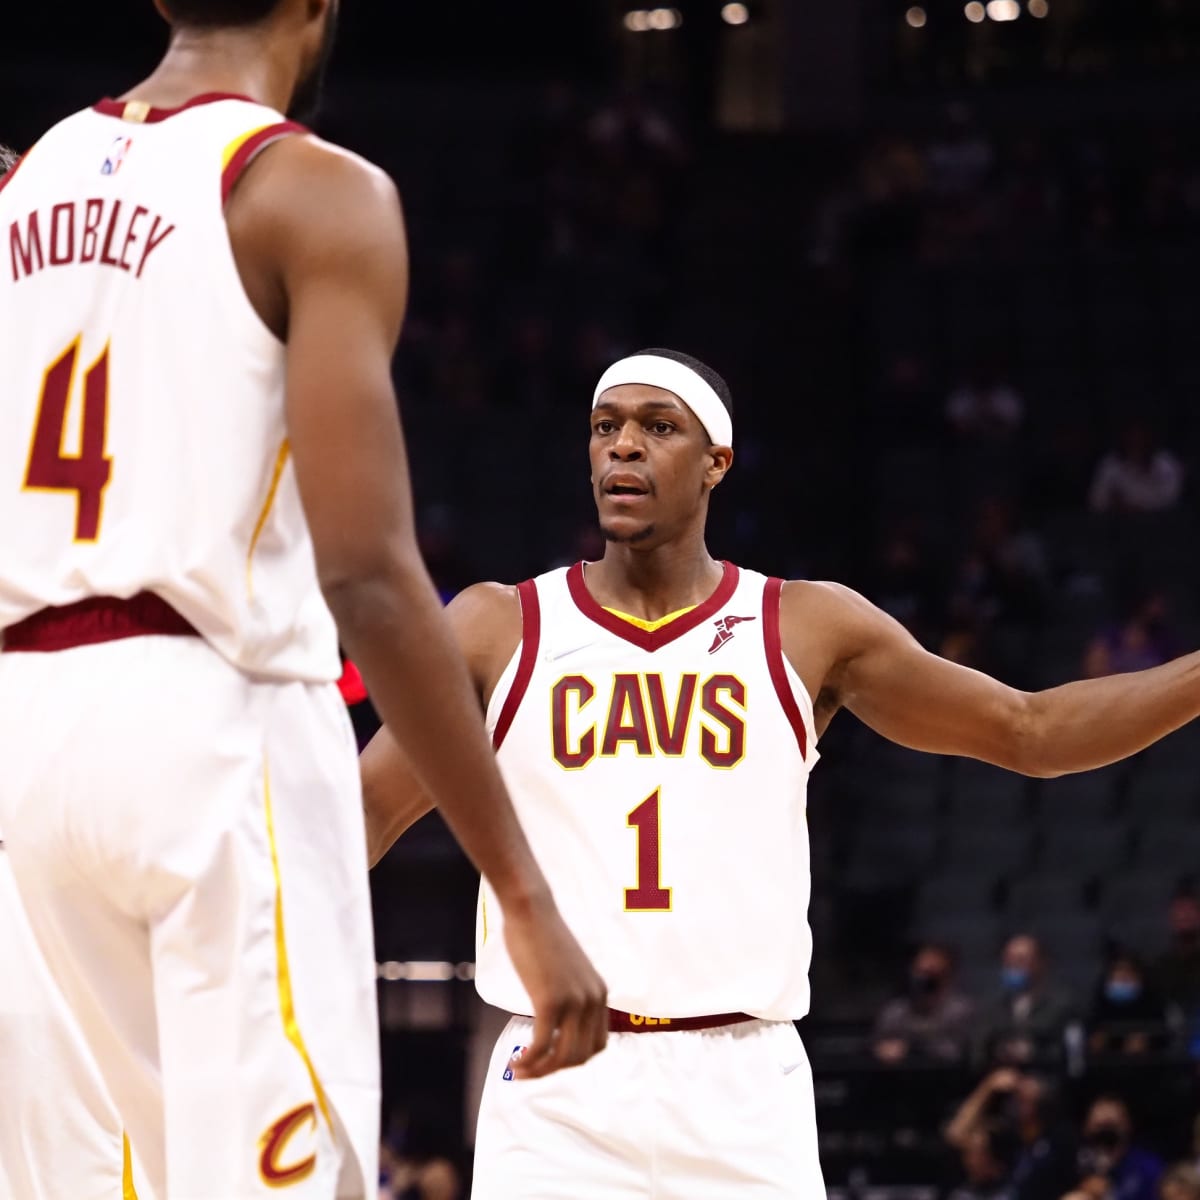 Cavs guard Rajon Rondo reportedly pulled a gun on his wife and threatened  to kill her during an argument.